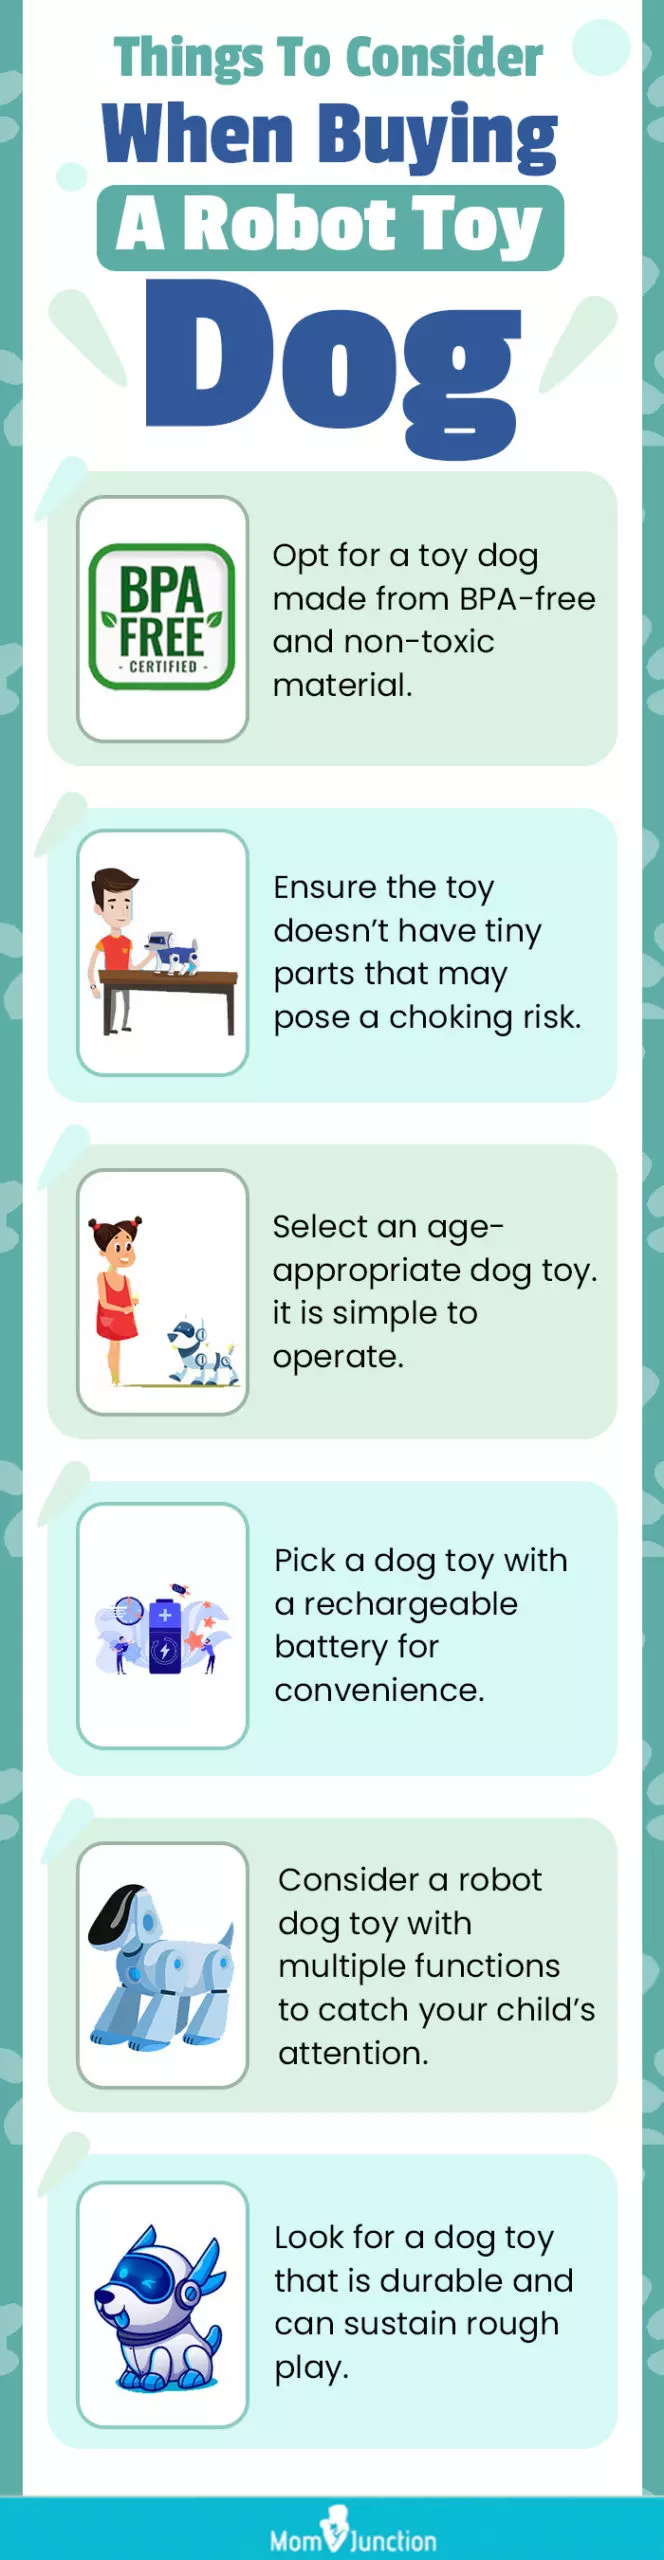 Things To Consider When Buying A Robot Toy Dog (Infographic)